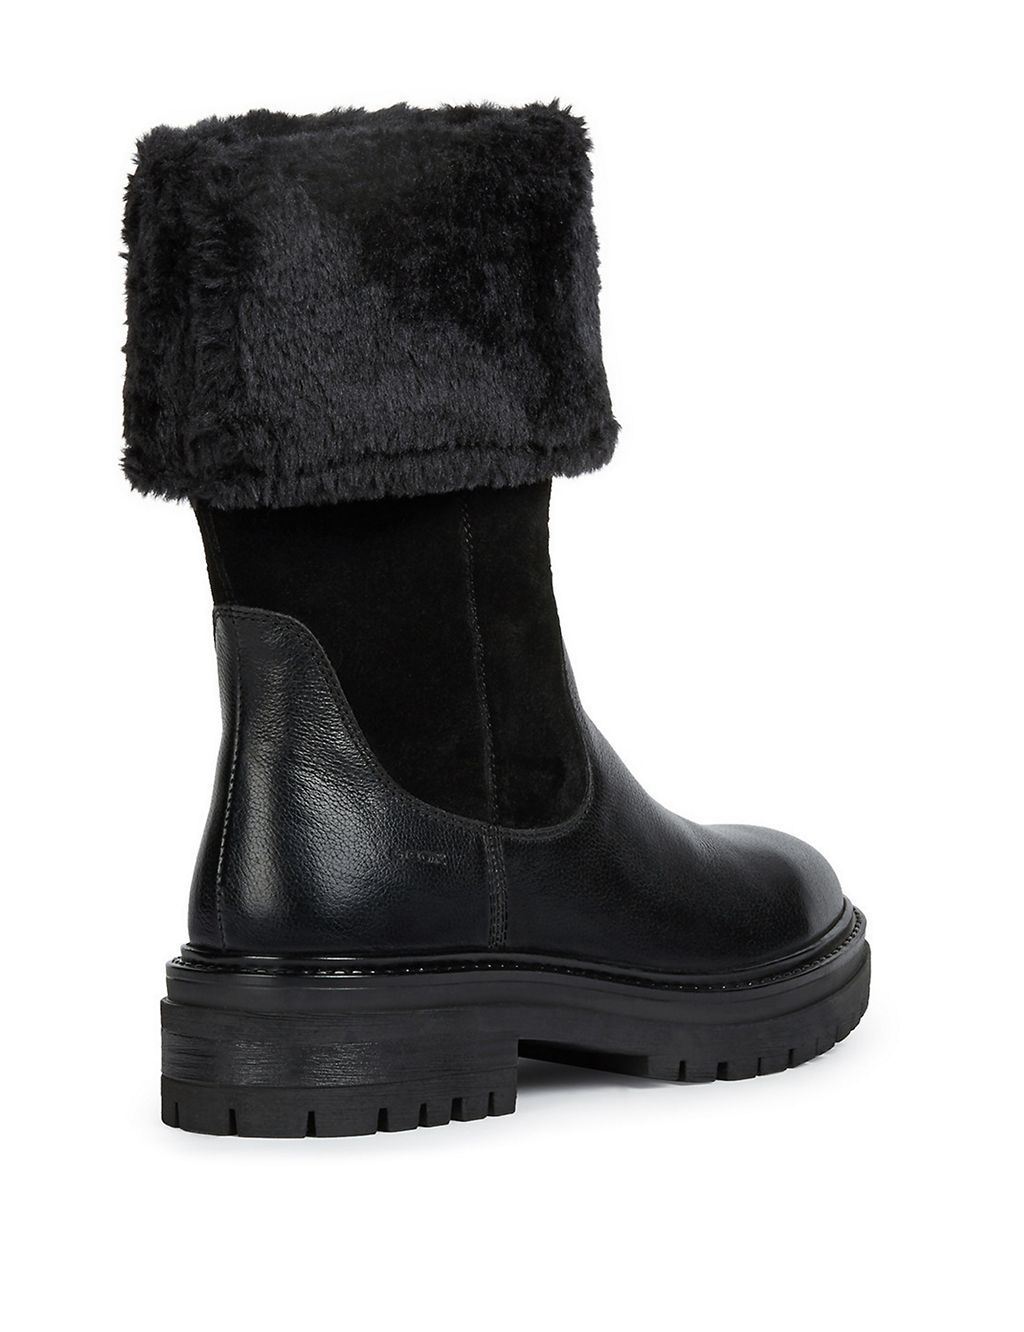 Leather Faux Fur Chunky Winter Boots 4 of 5